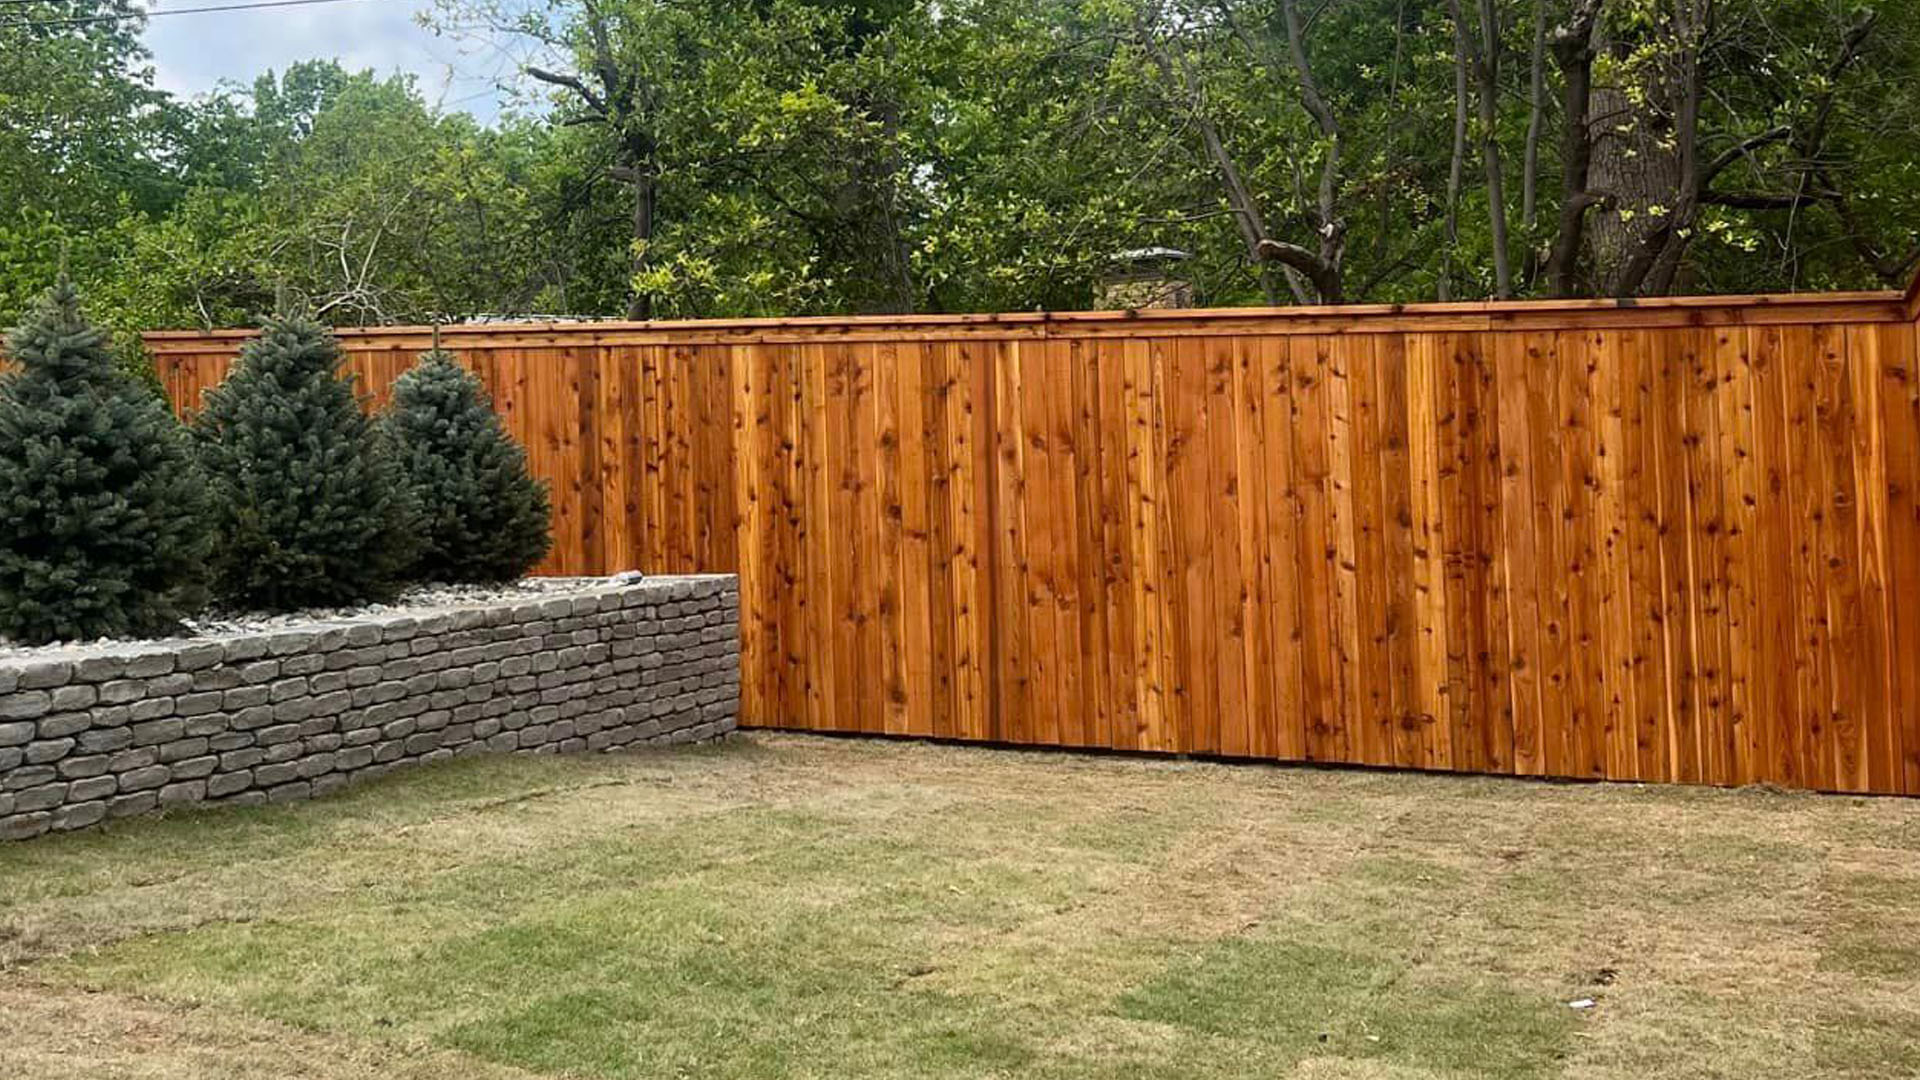 THE BENEFITS OF FENCE STAINING IN TULSA